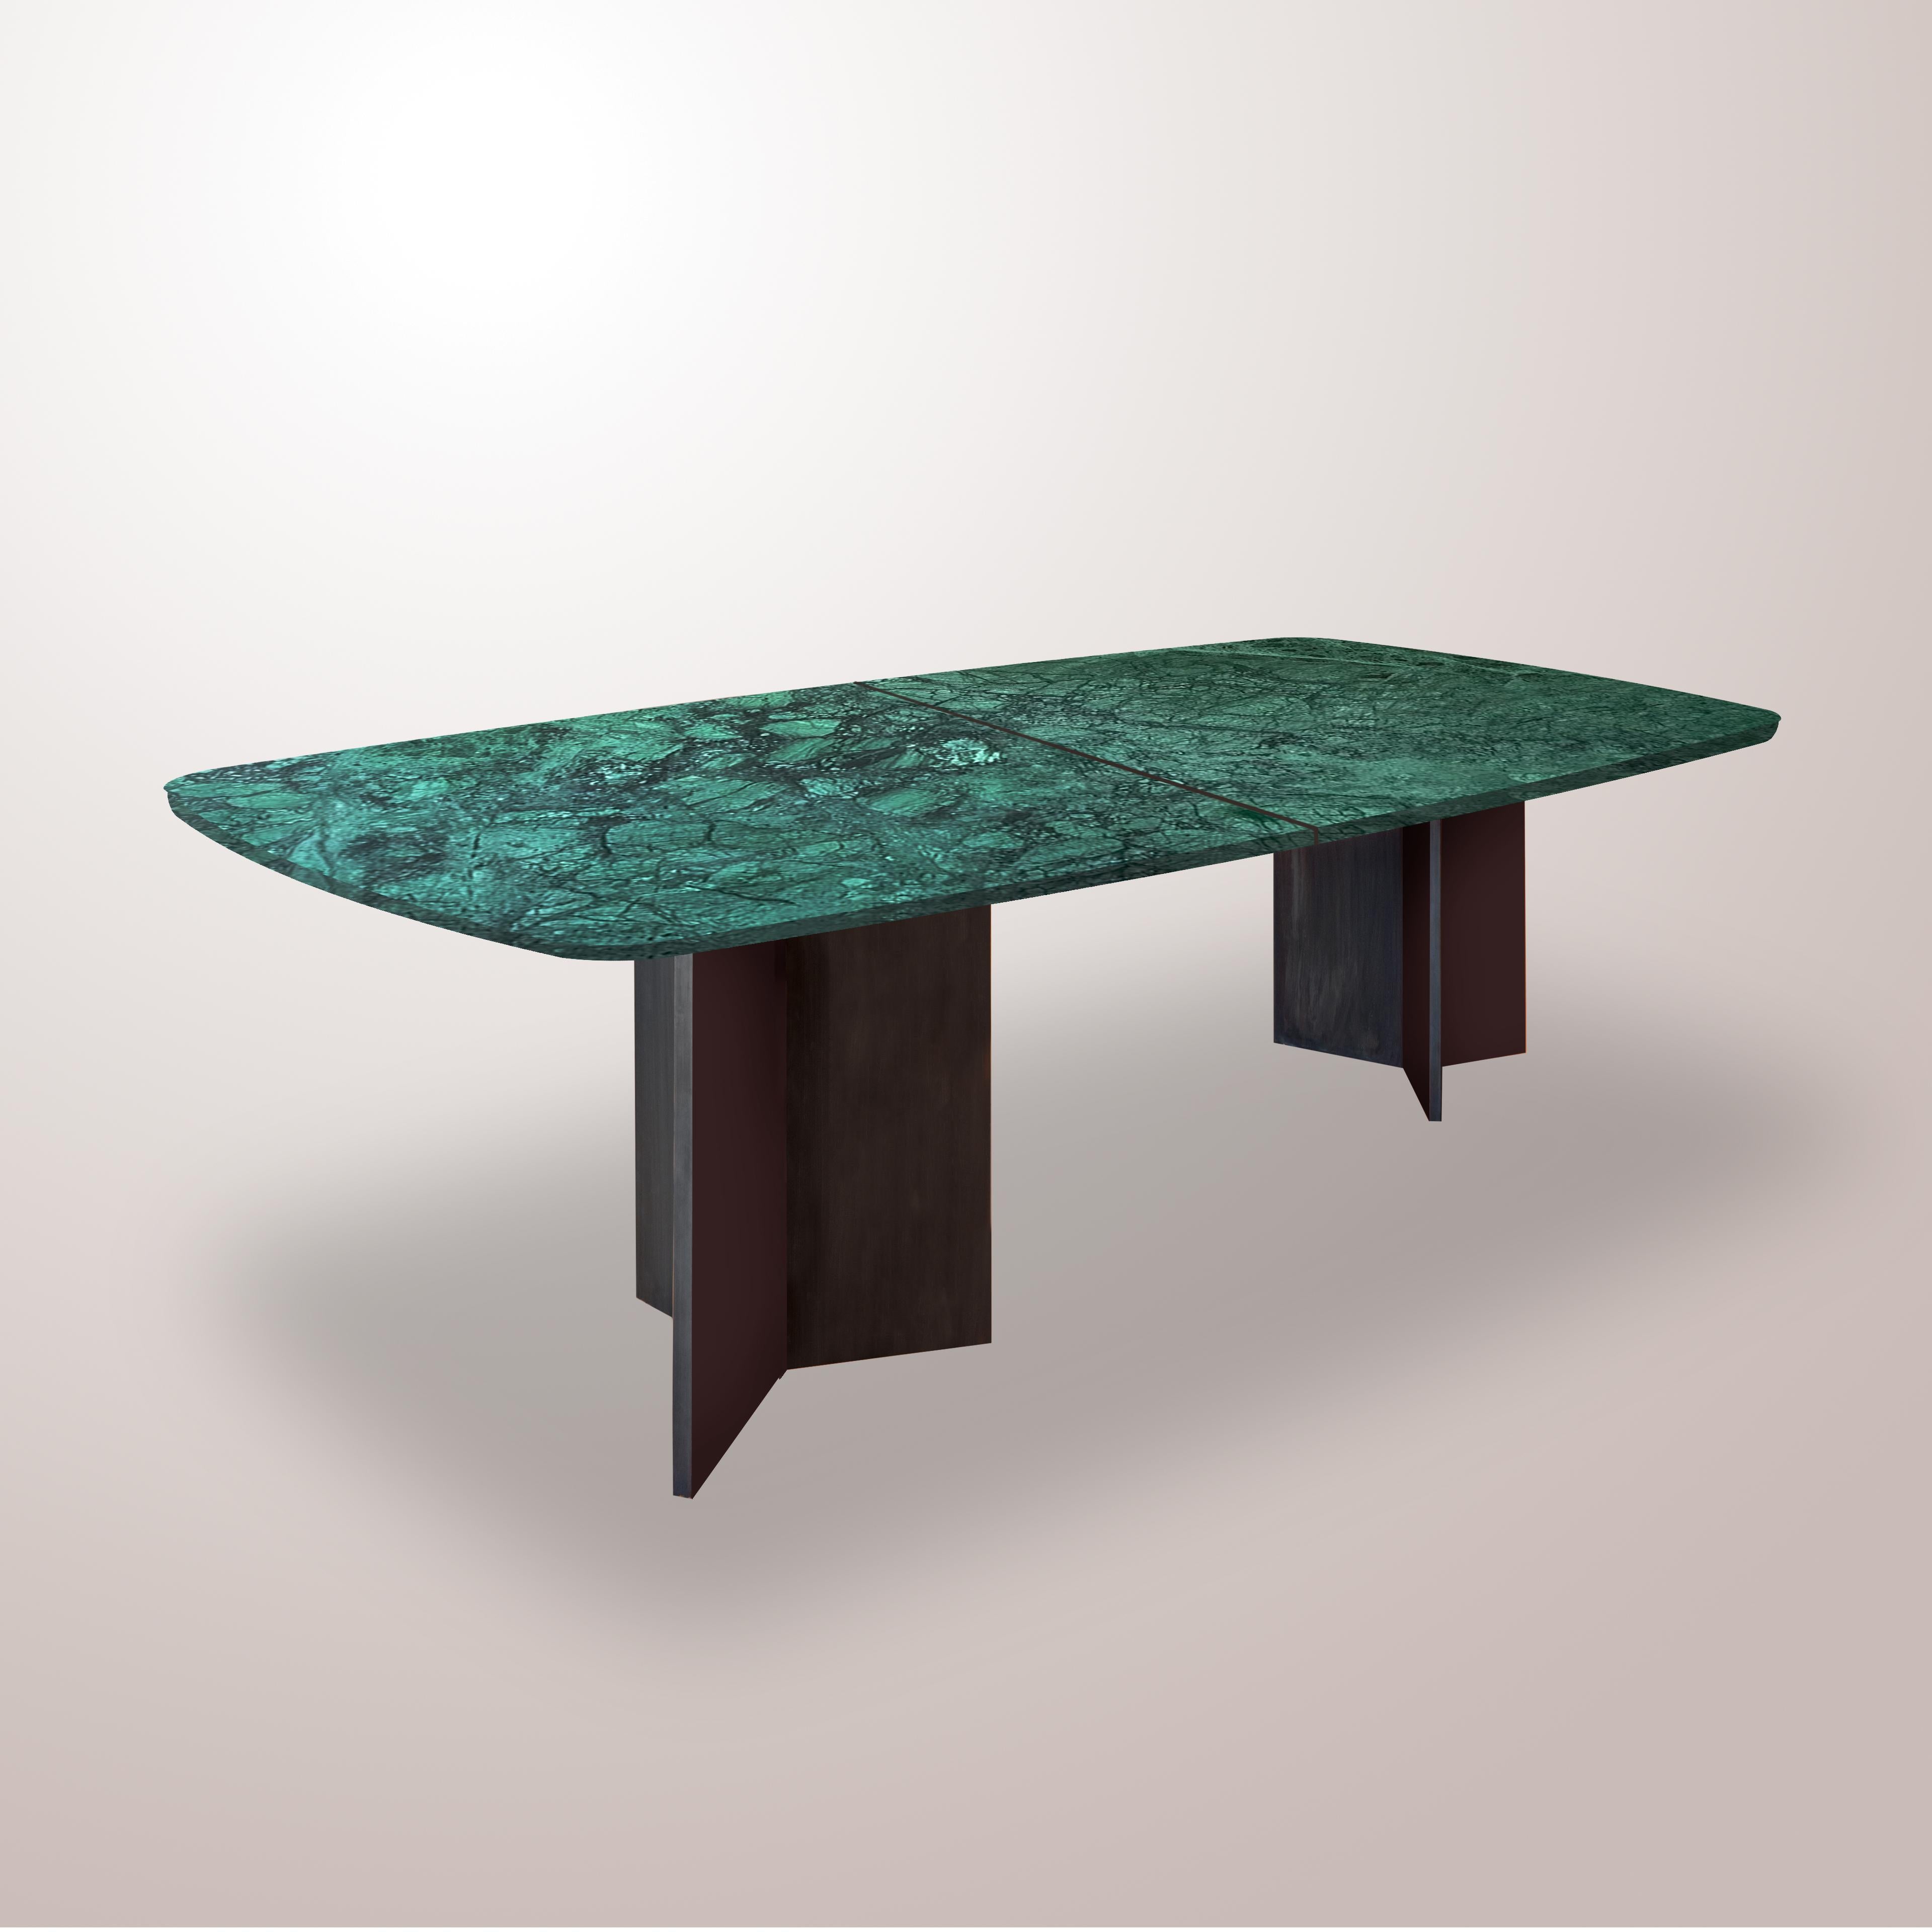 Note that the pattern of the stone will vary as it's a natural stone.

As with all our furniture, this table is made to order and is therefore highly customisable, including in size and finish. The customisation fee is only 10%, which is added to